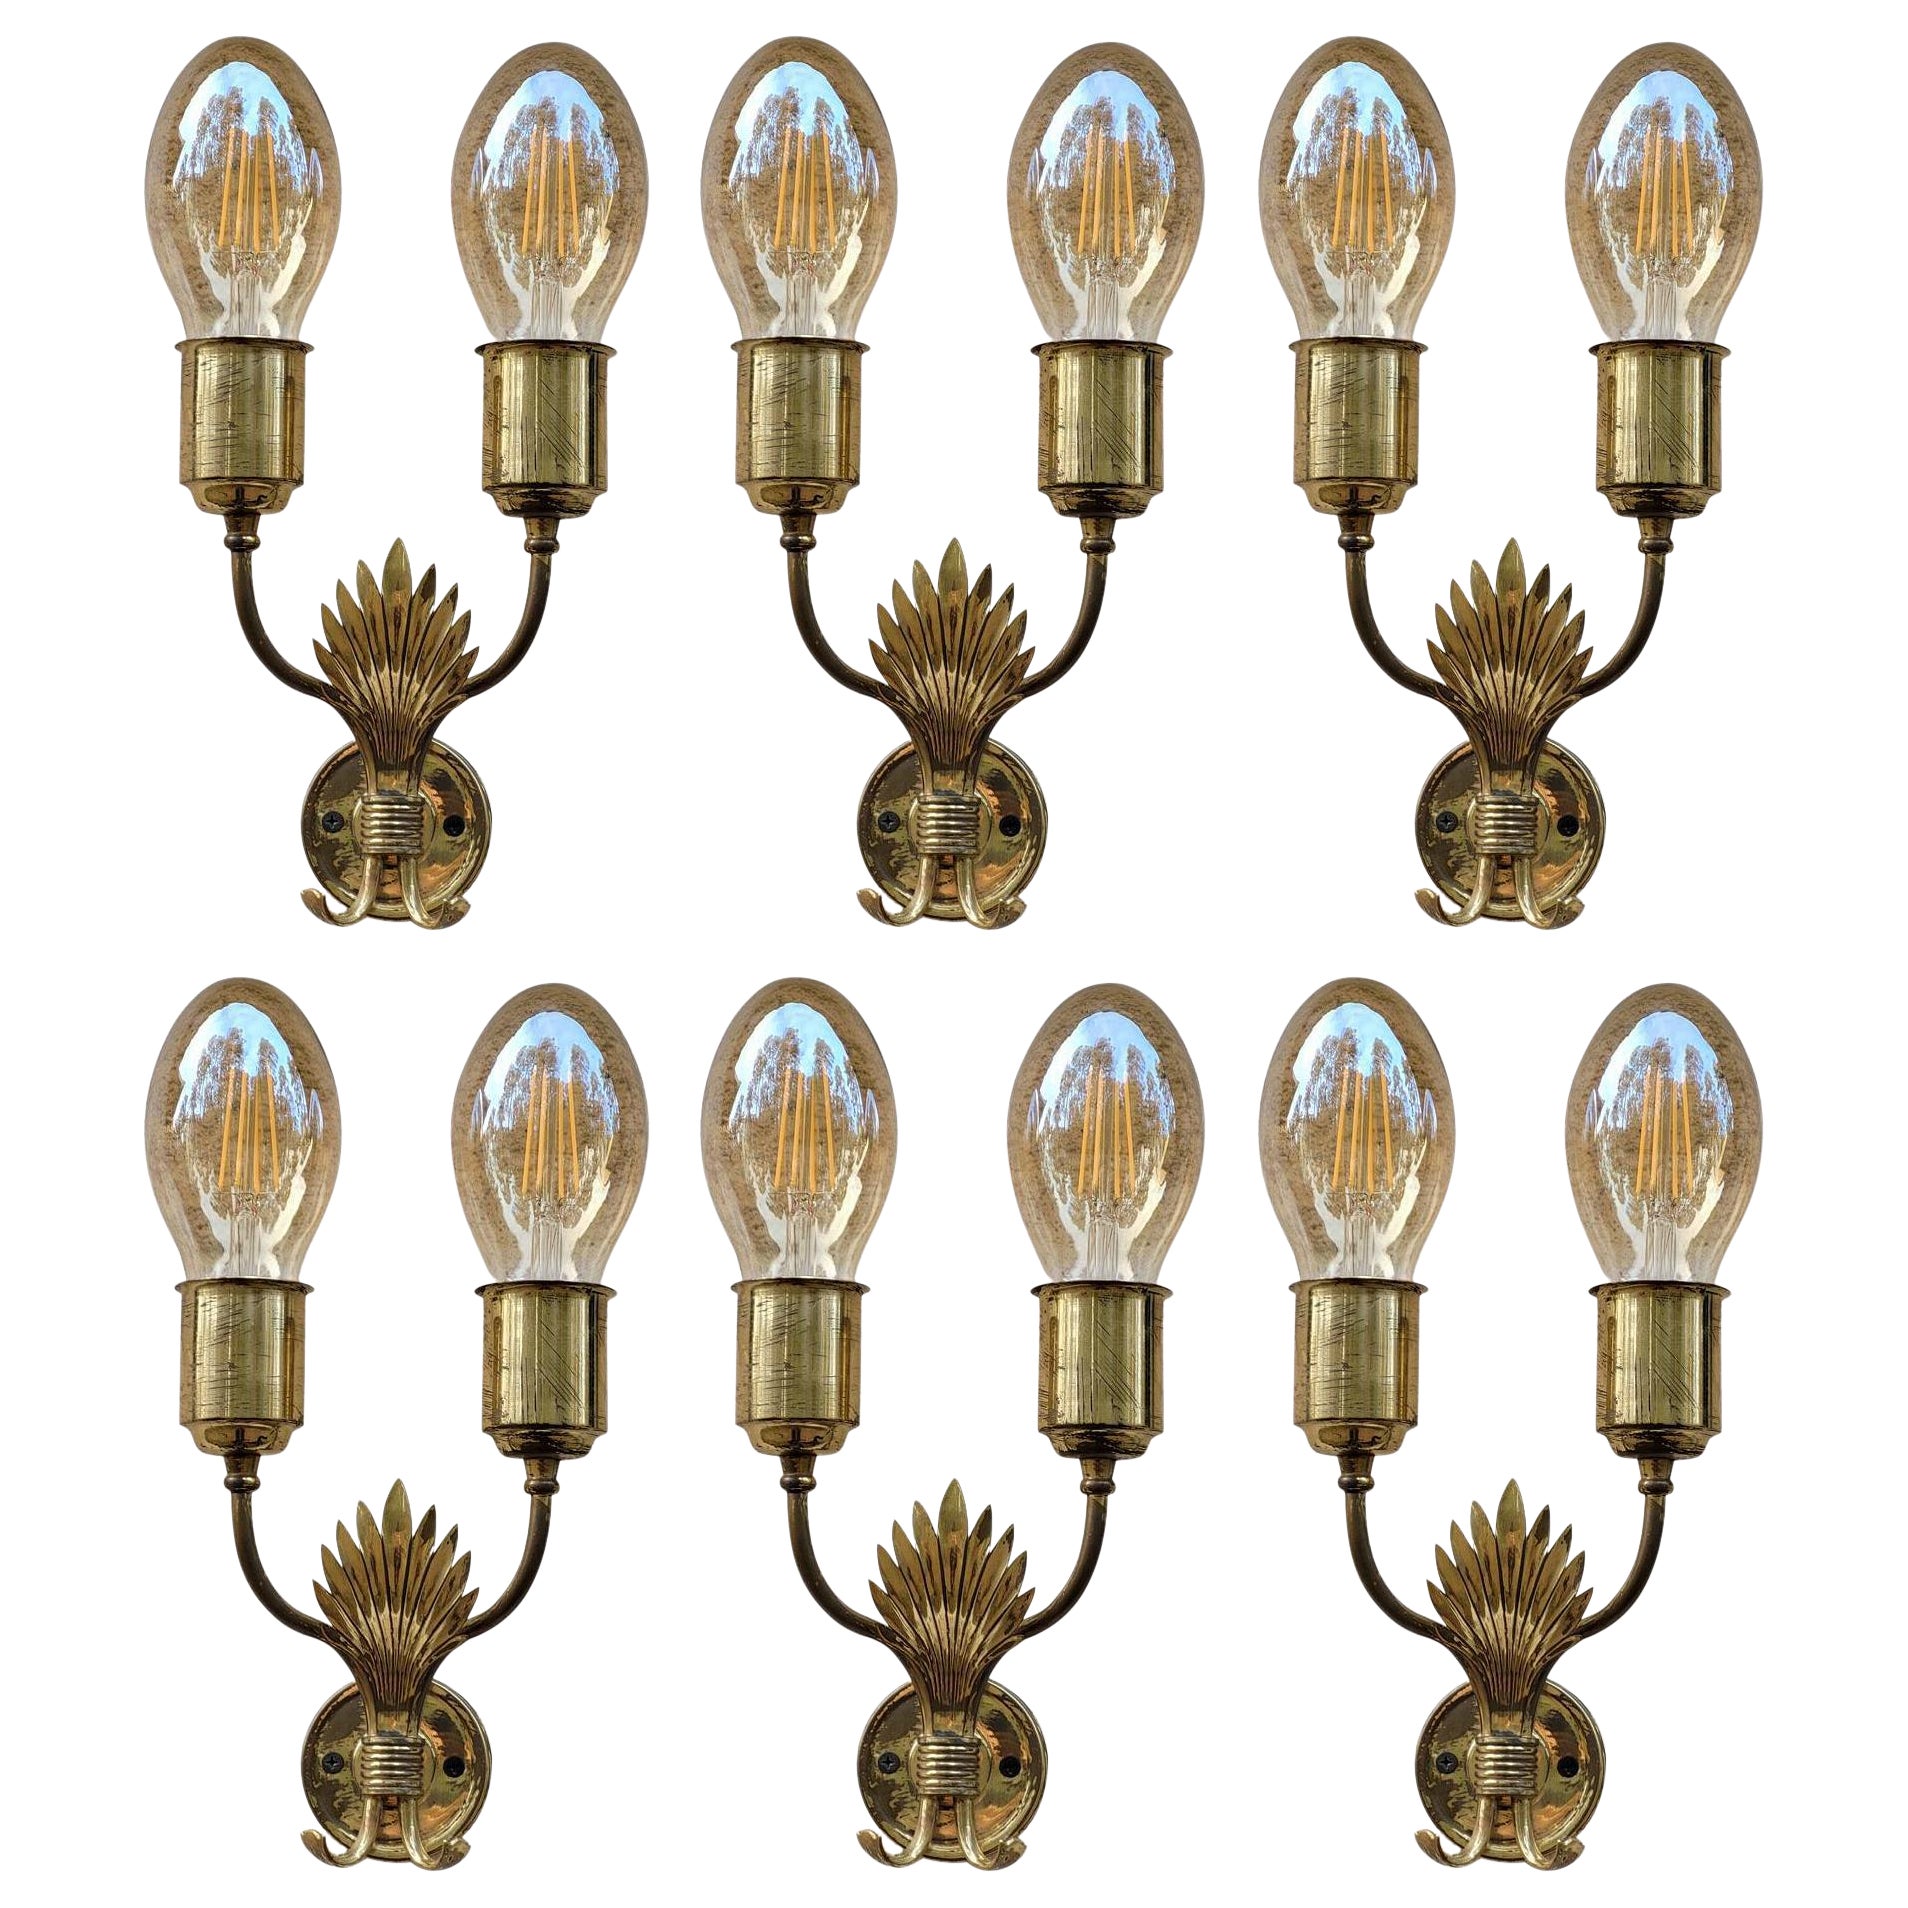 One of... Italian Vintage Sculptural Brass Sconce Wall Light, 1950s For Sale